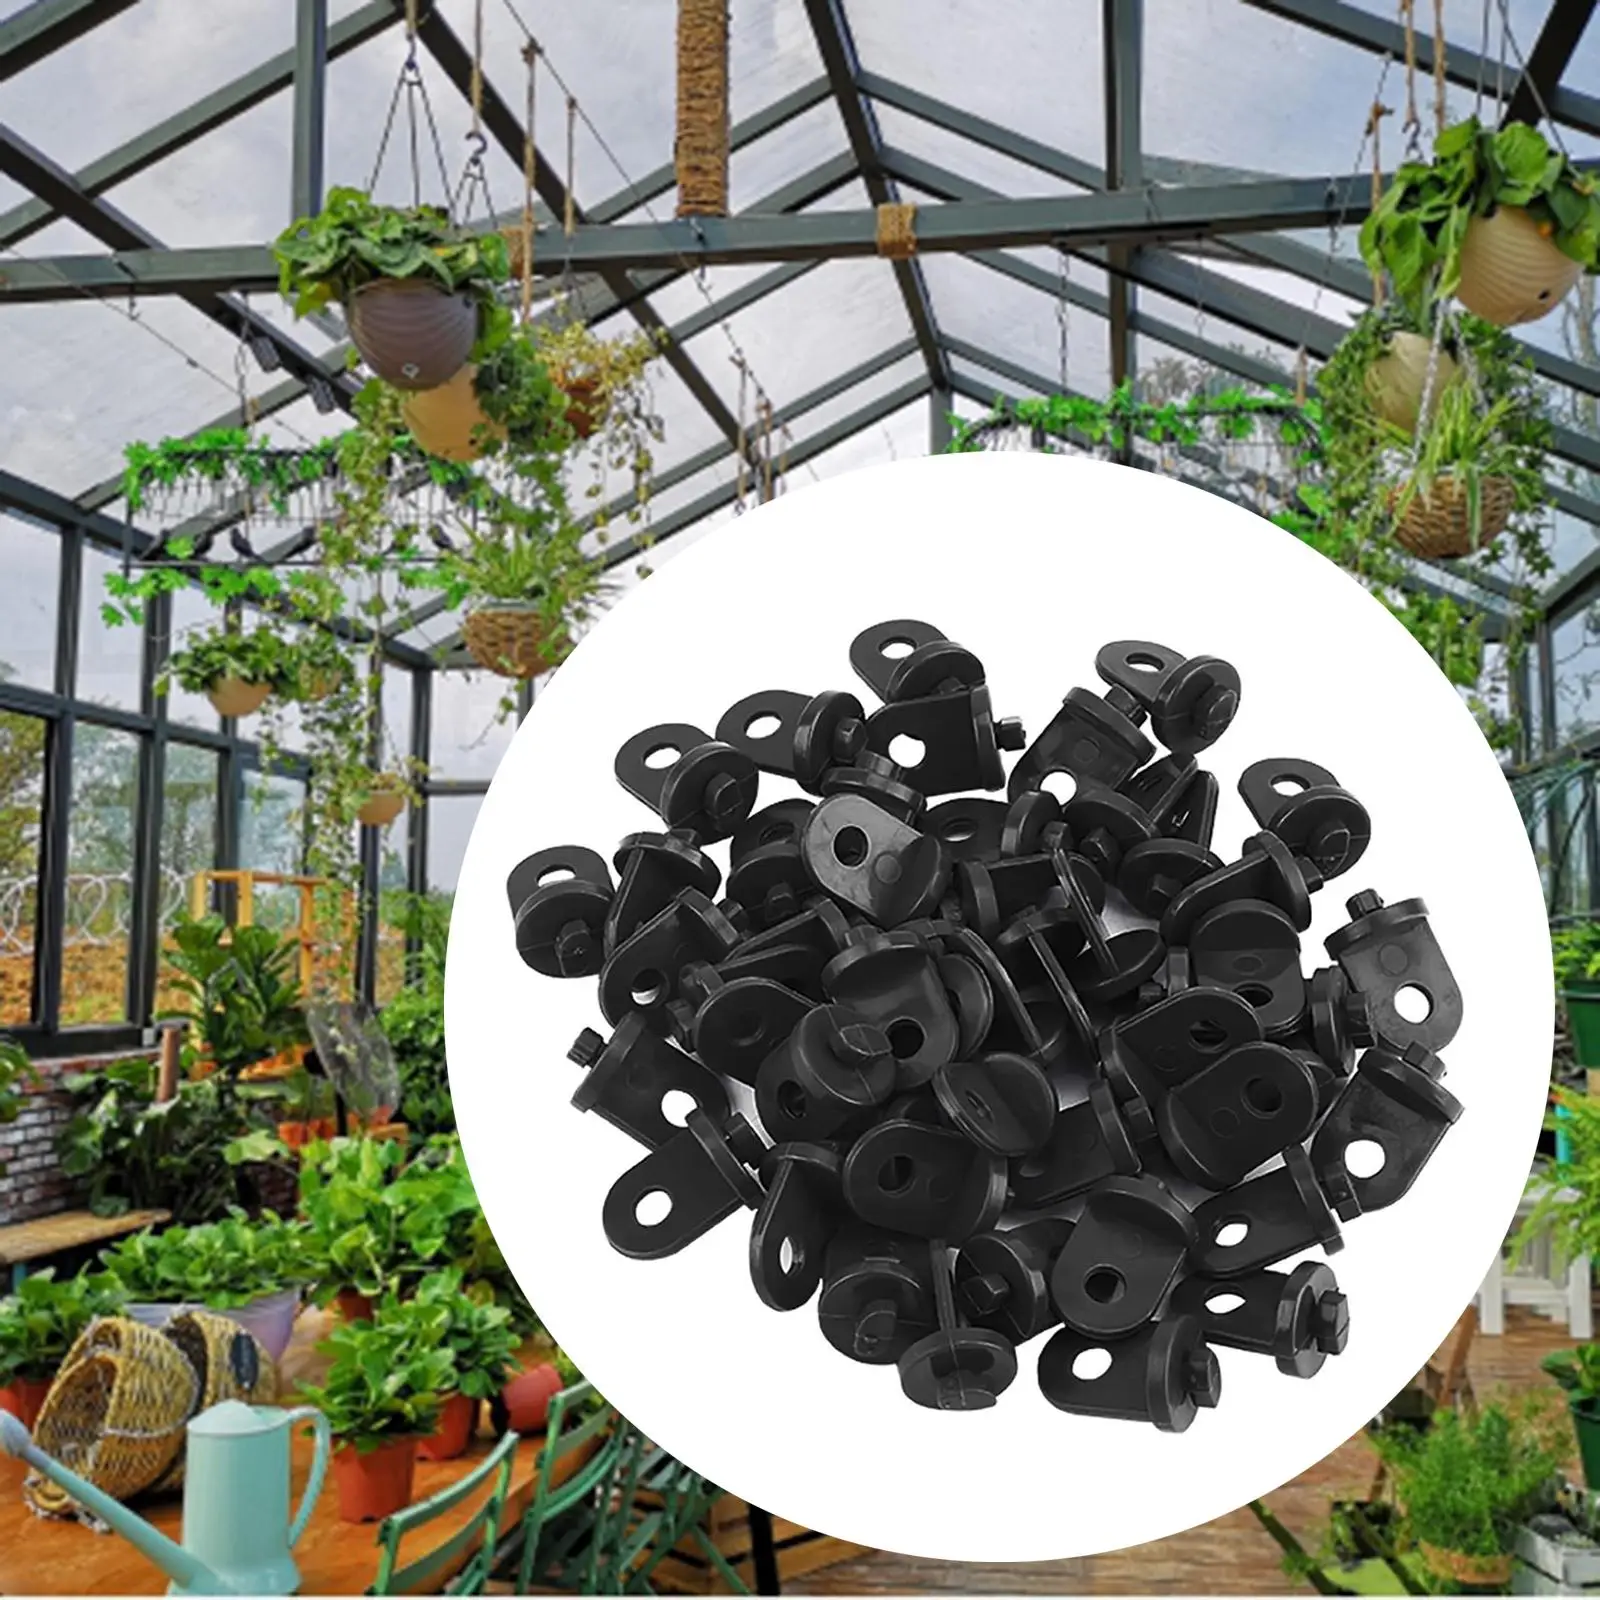 50x Greenhouse Plants Hook Hanger Twist Clips Accessories for Pots Insulation Netting Shading Tomato Hanging Flower Baskets